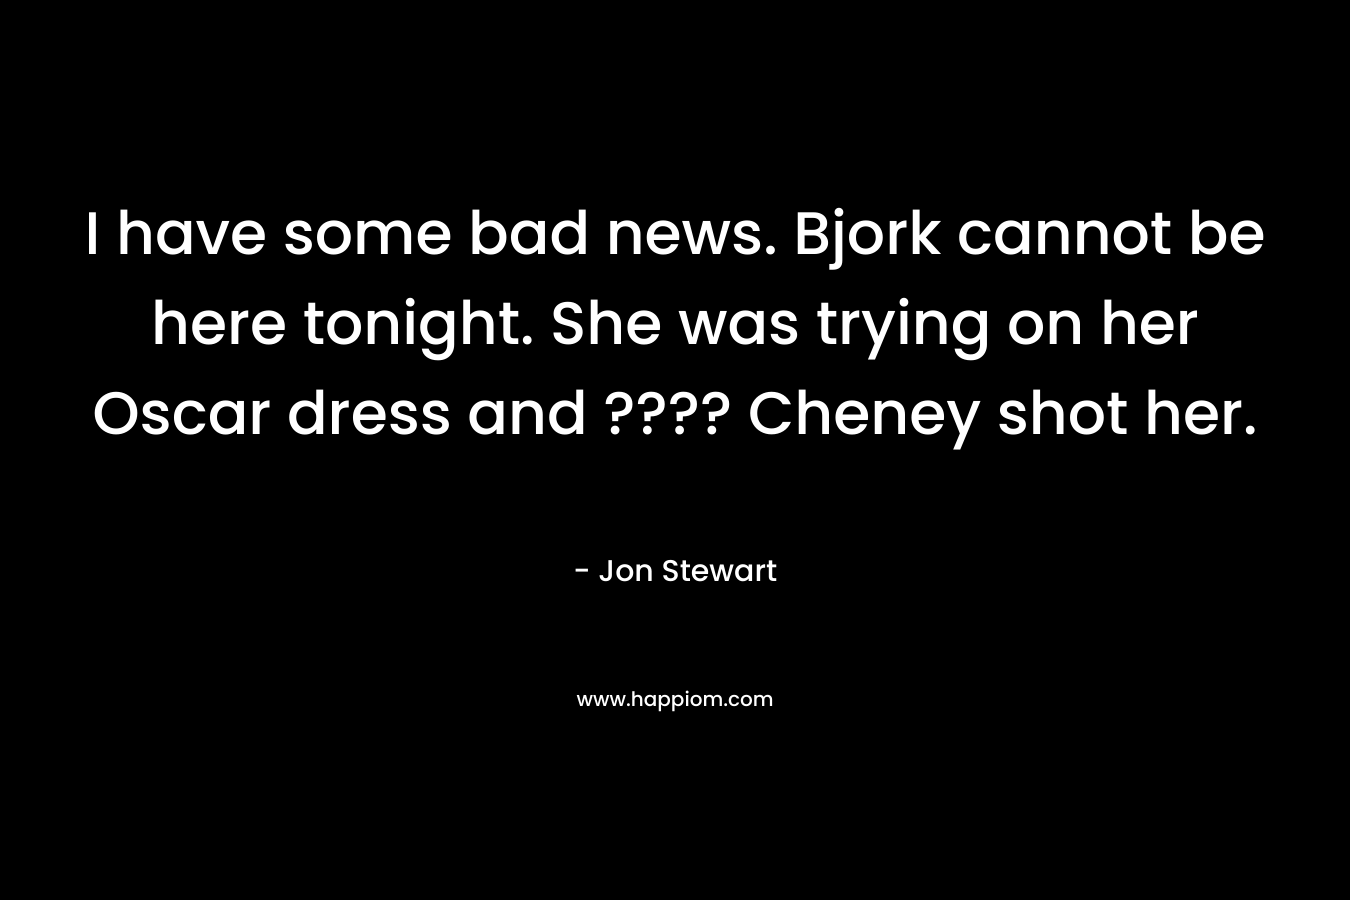 I have some bad news. Bjork cannot be here tonight. She was trying on her Oscar dress and ???? Cheney shot her. – Jon Stewart